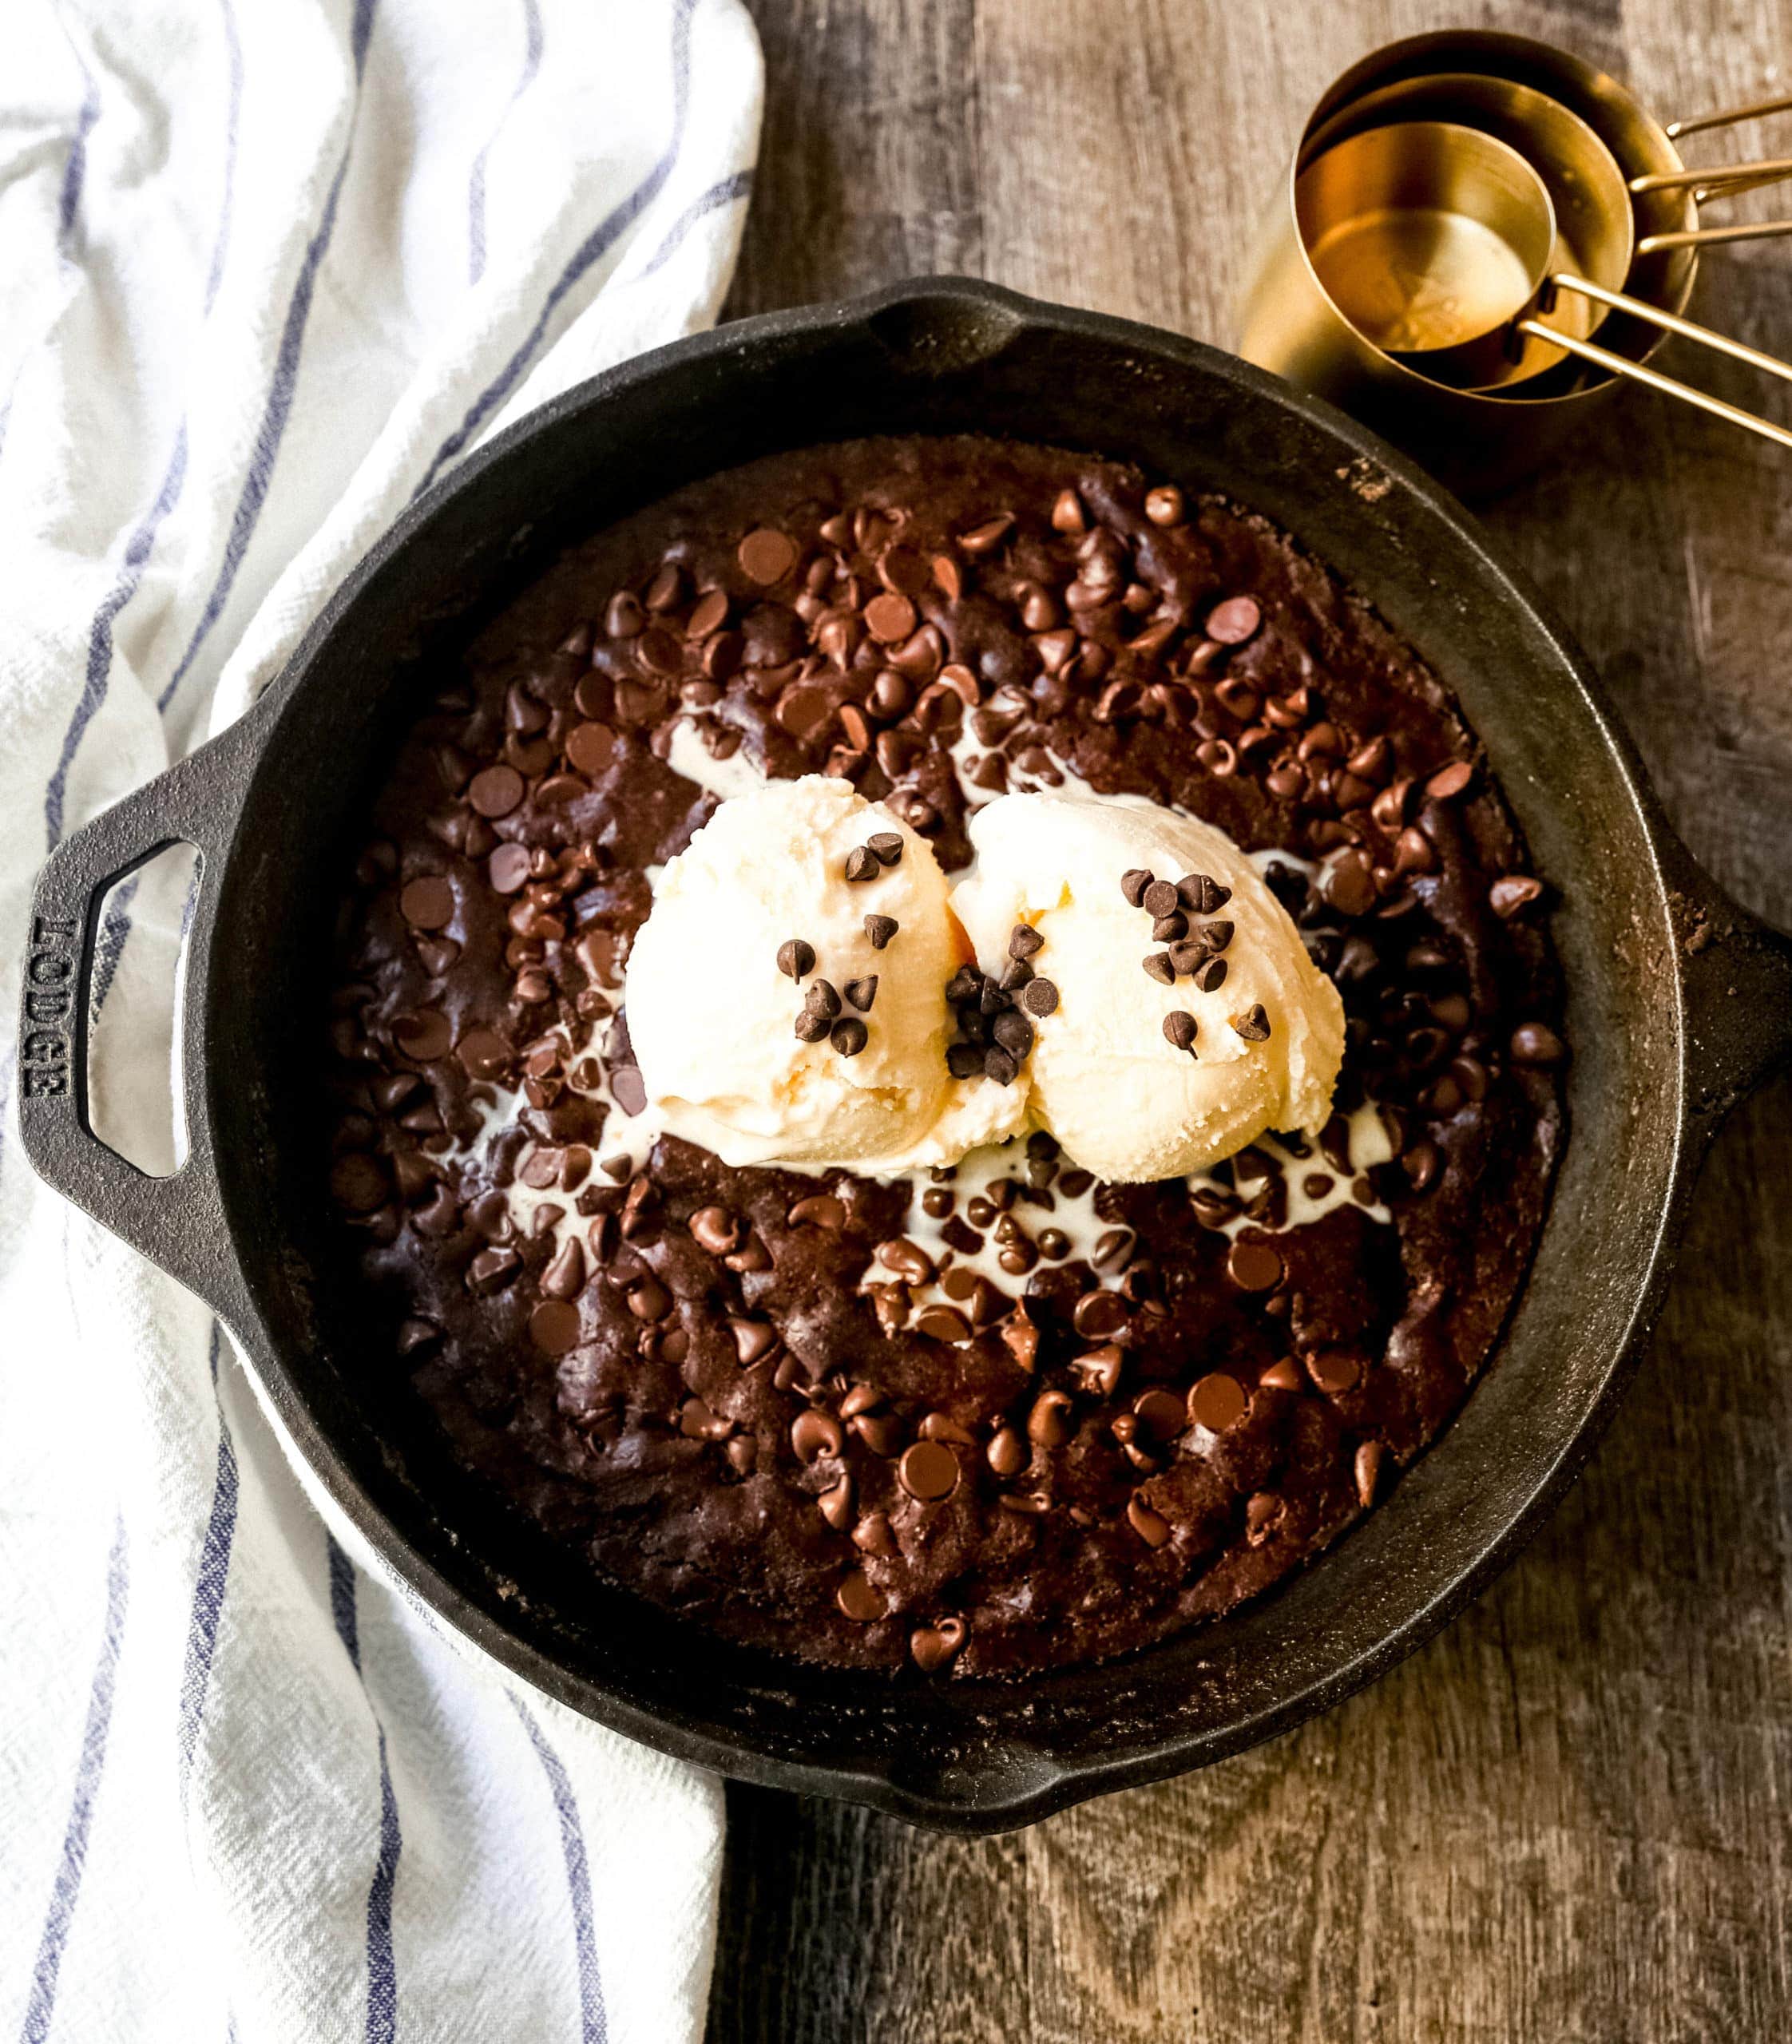 https://www.modernhoney.com/wp-content/uploads/2020/10/Double-Chocolate-Chocolate-Chip-Skillet-Cookie-9-scaled.jpg